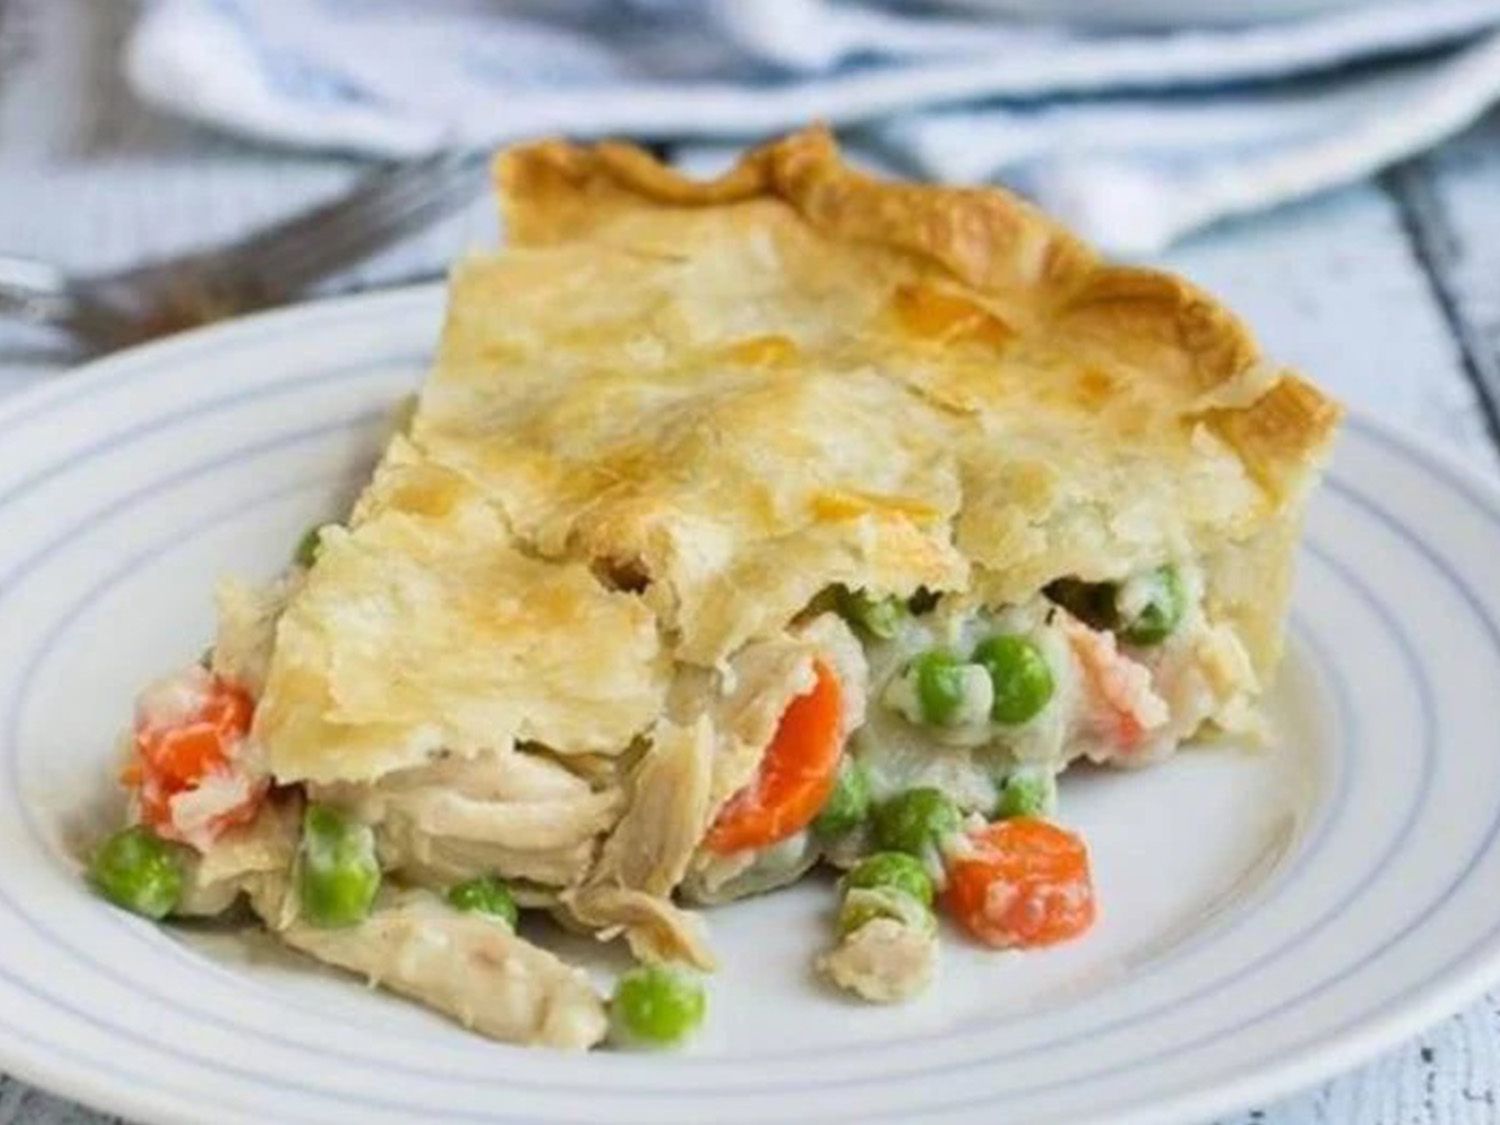 Latest News - Nothing Says “Comfort” Like a Savory Pie on a Chilly Night!